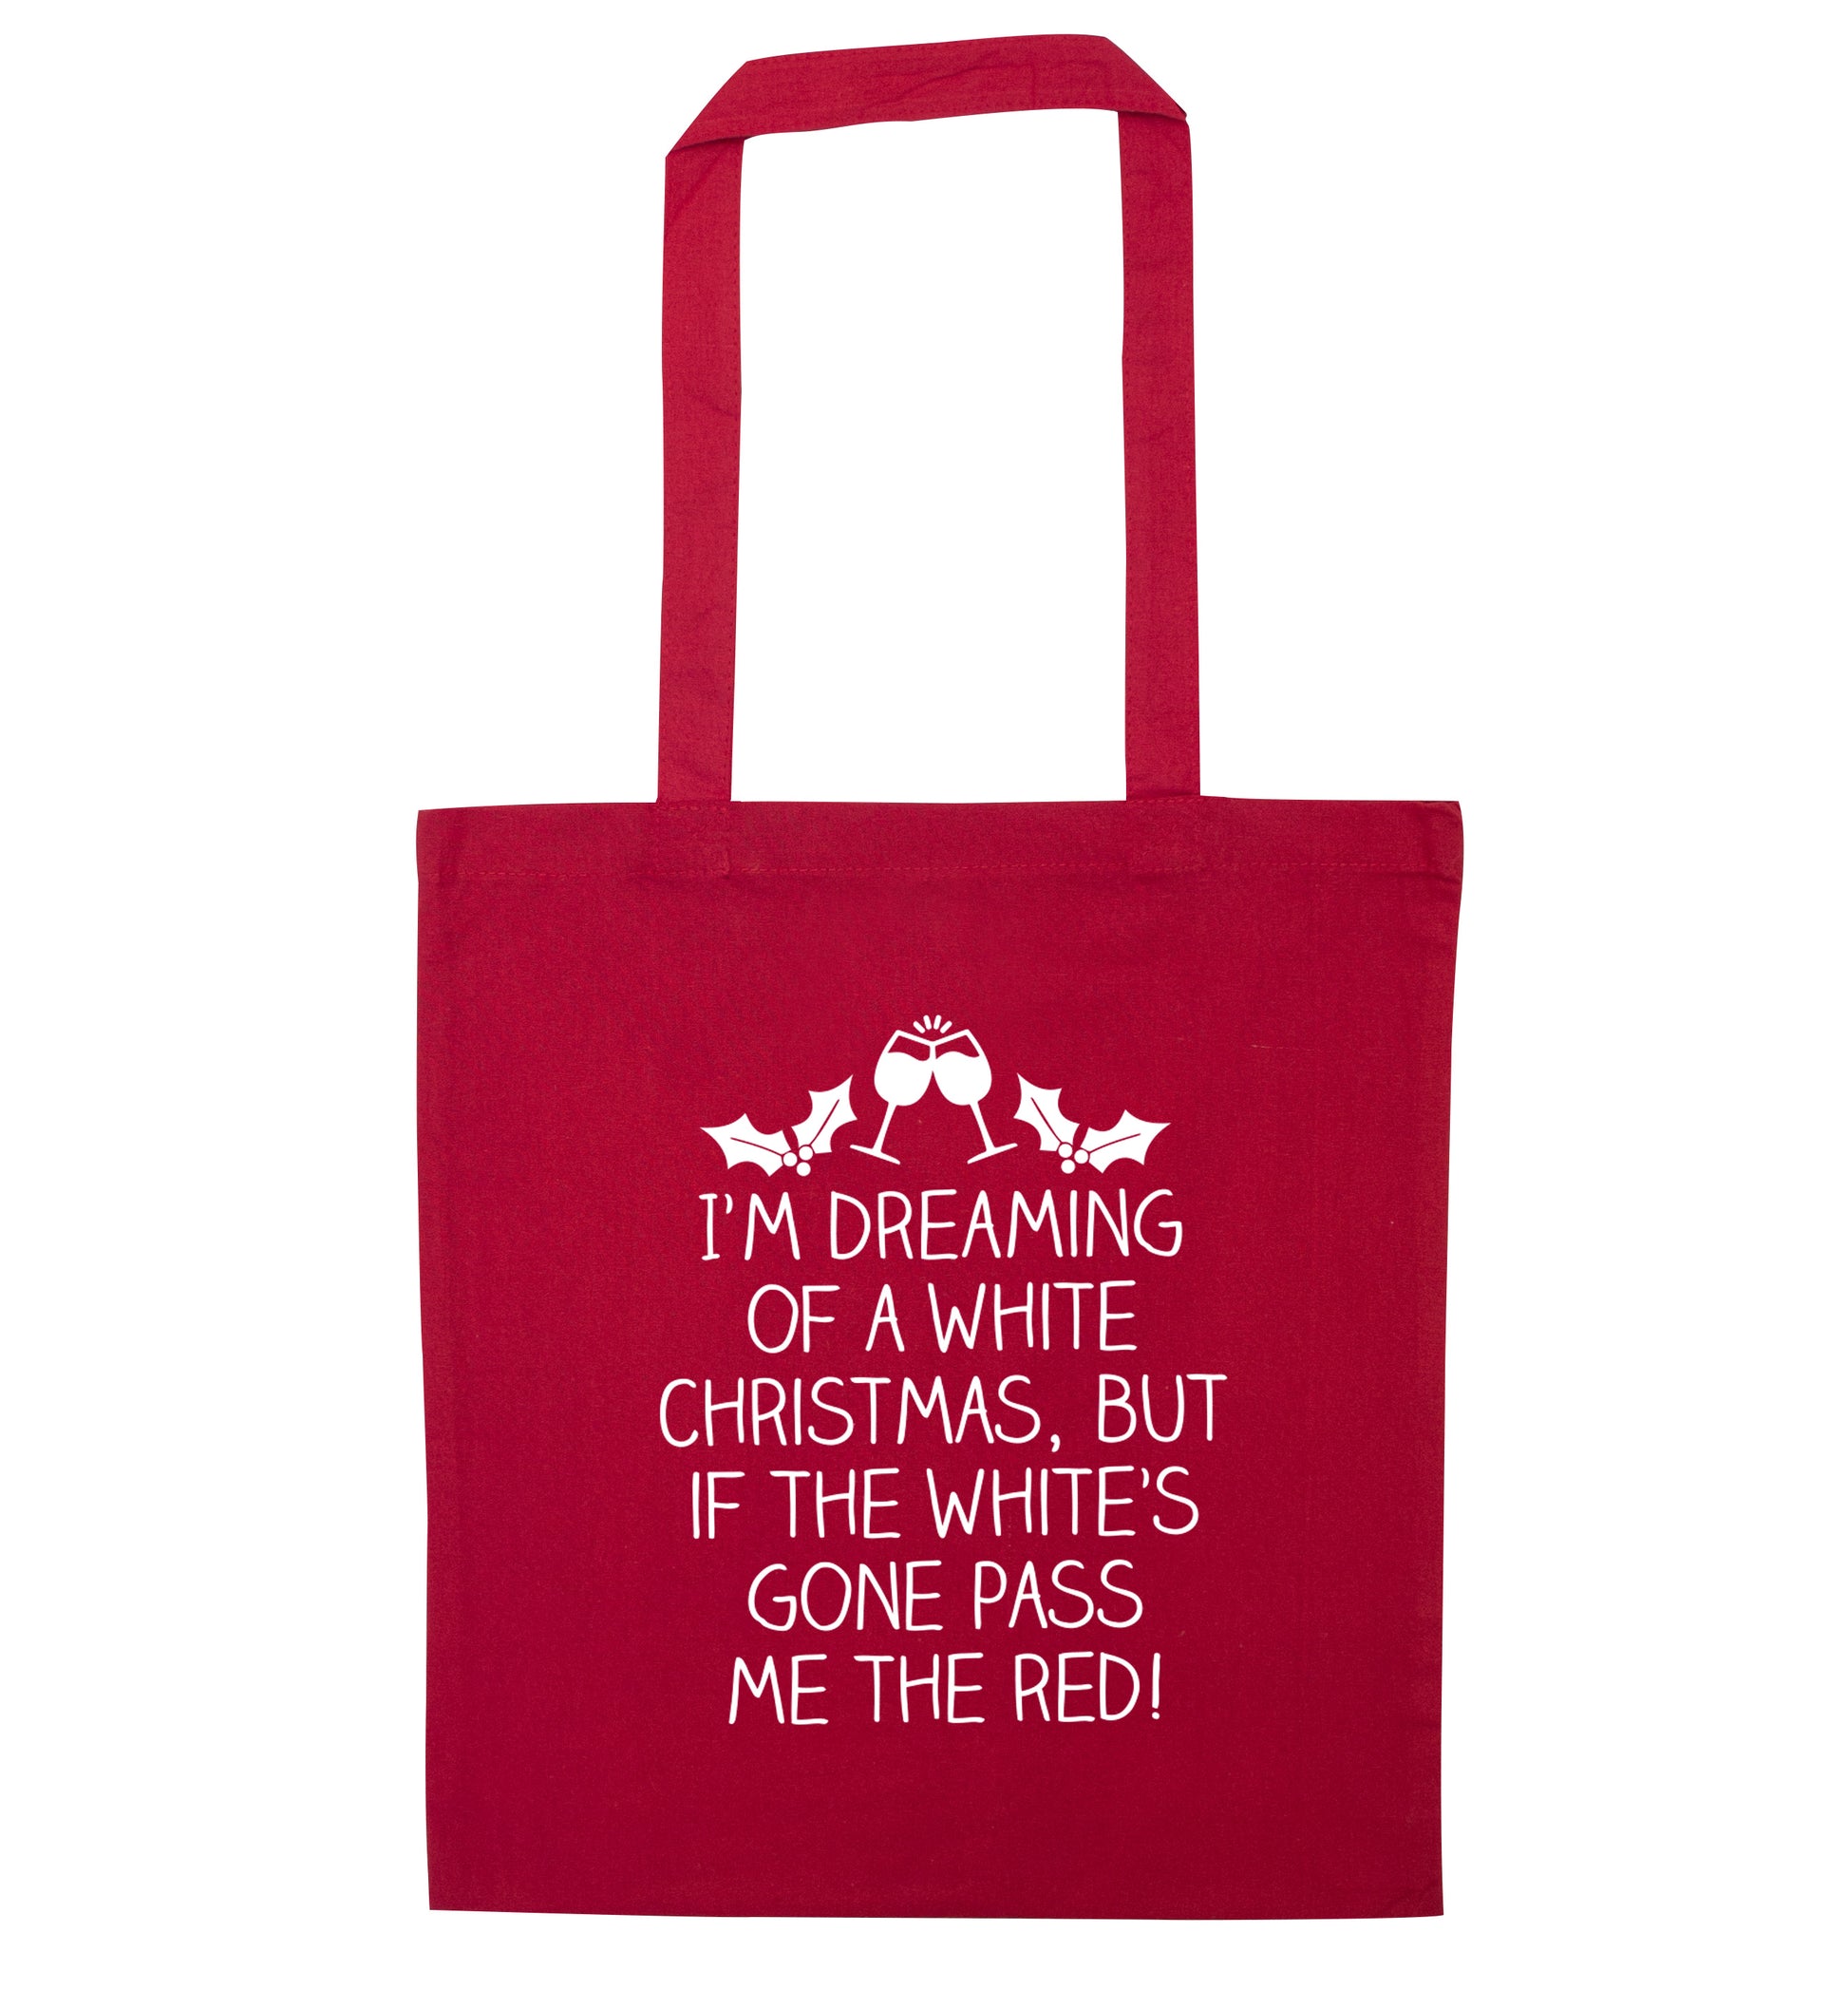 I'm dreaming of a white christmas, but if the white's gone pass me the red! red tote bag